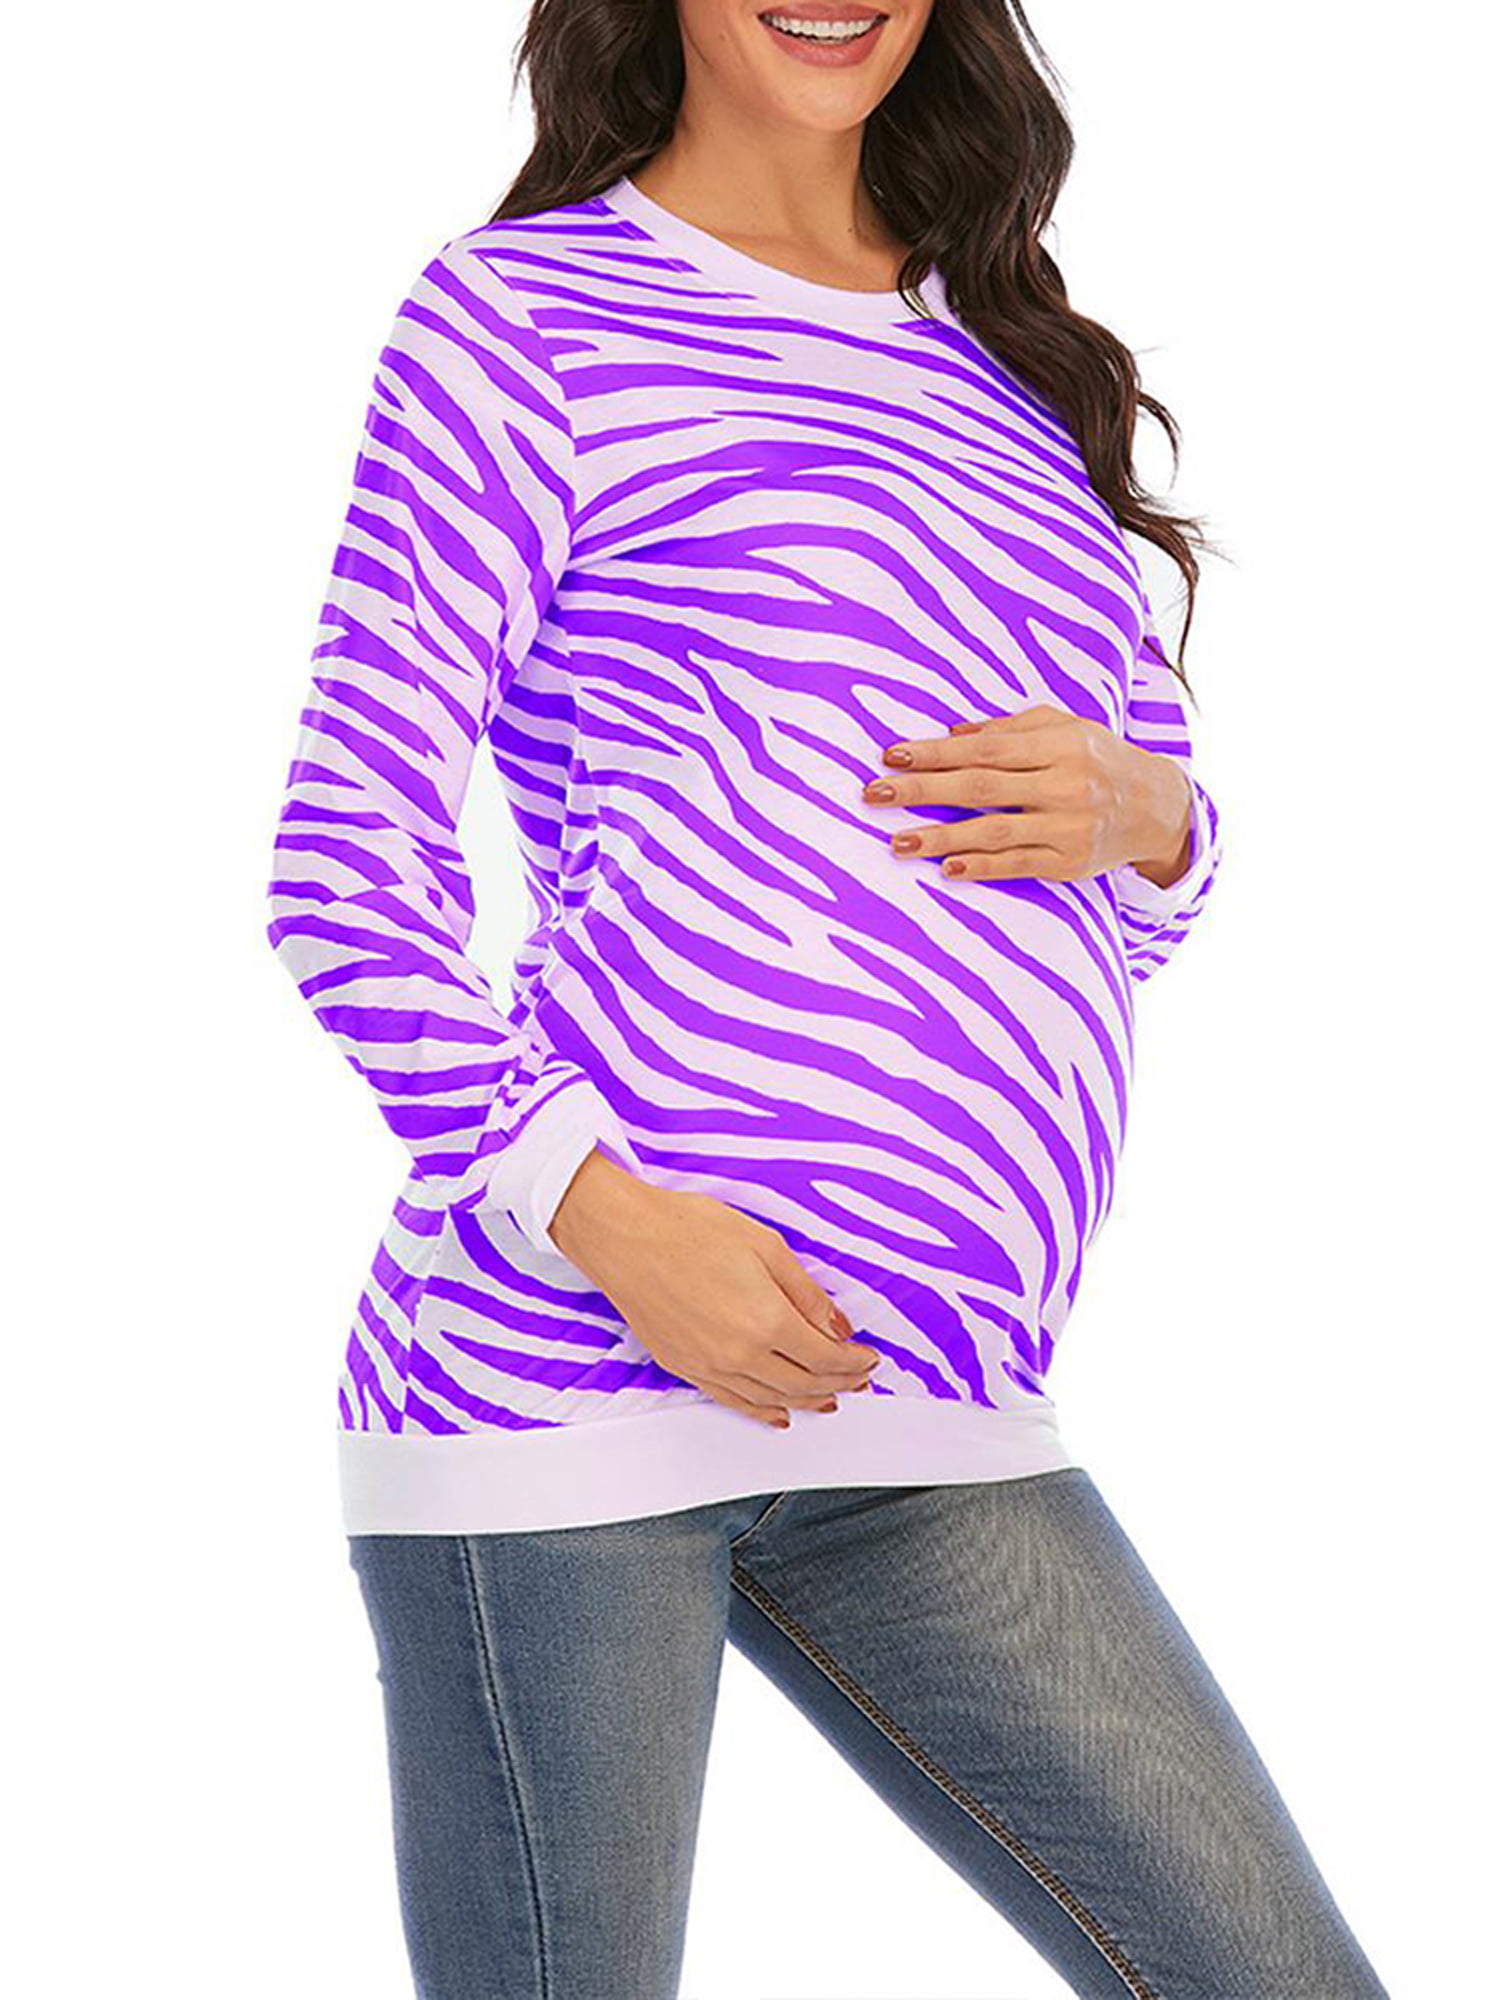 Womens Stripe Maternity T-shirt Tee Tops Long Sleeve Pregnancy Casual Blouse 